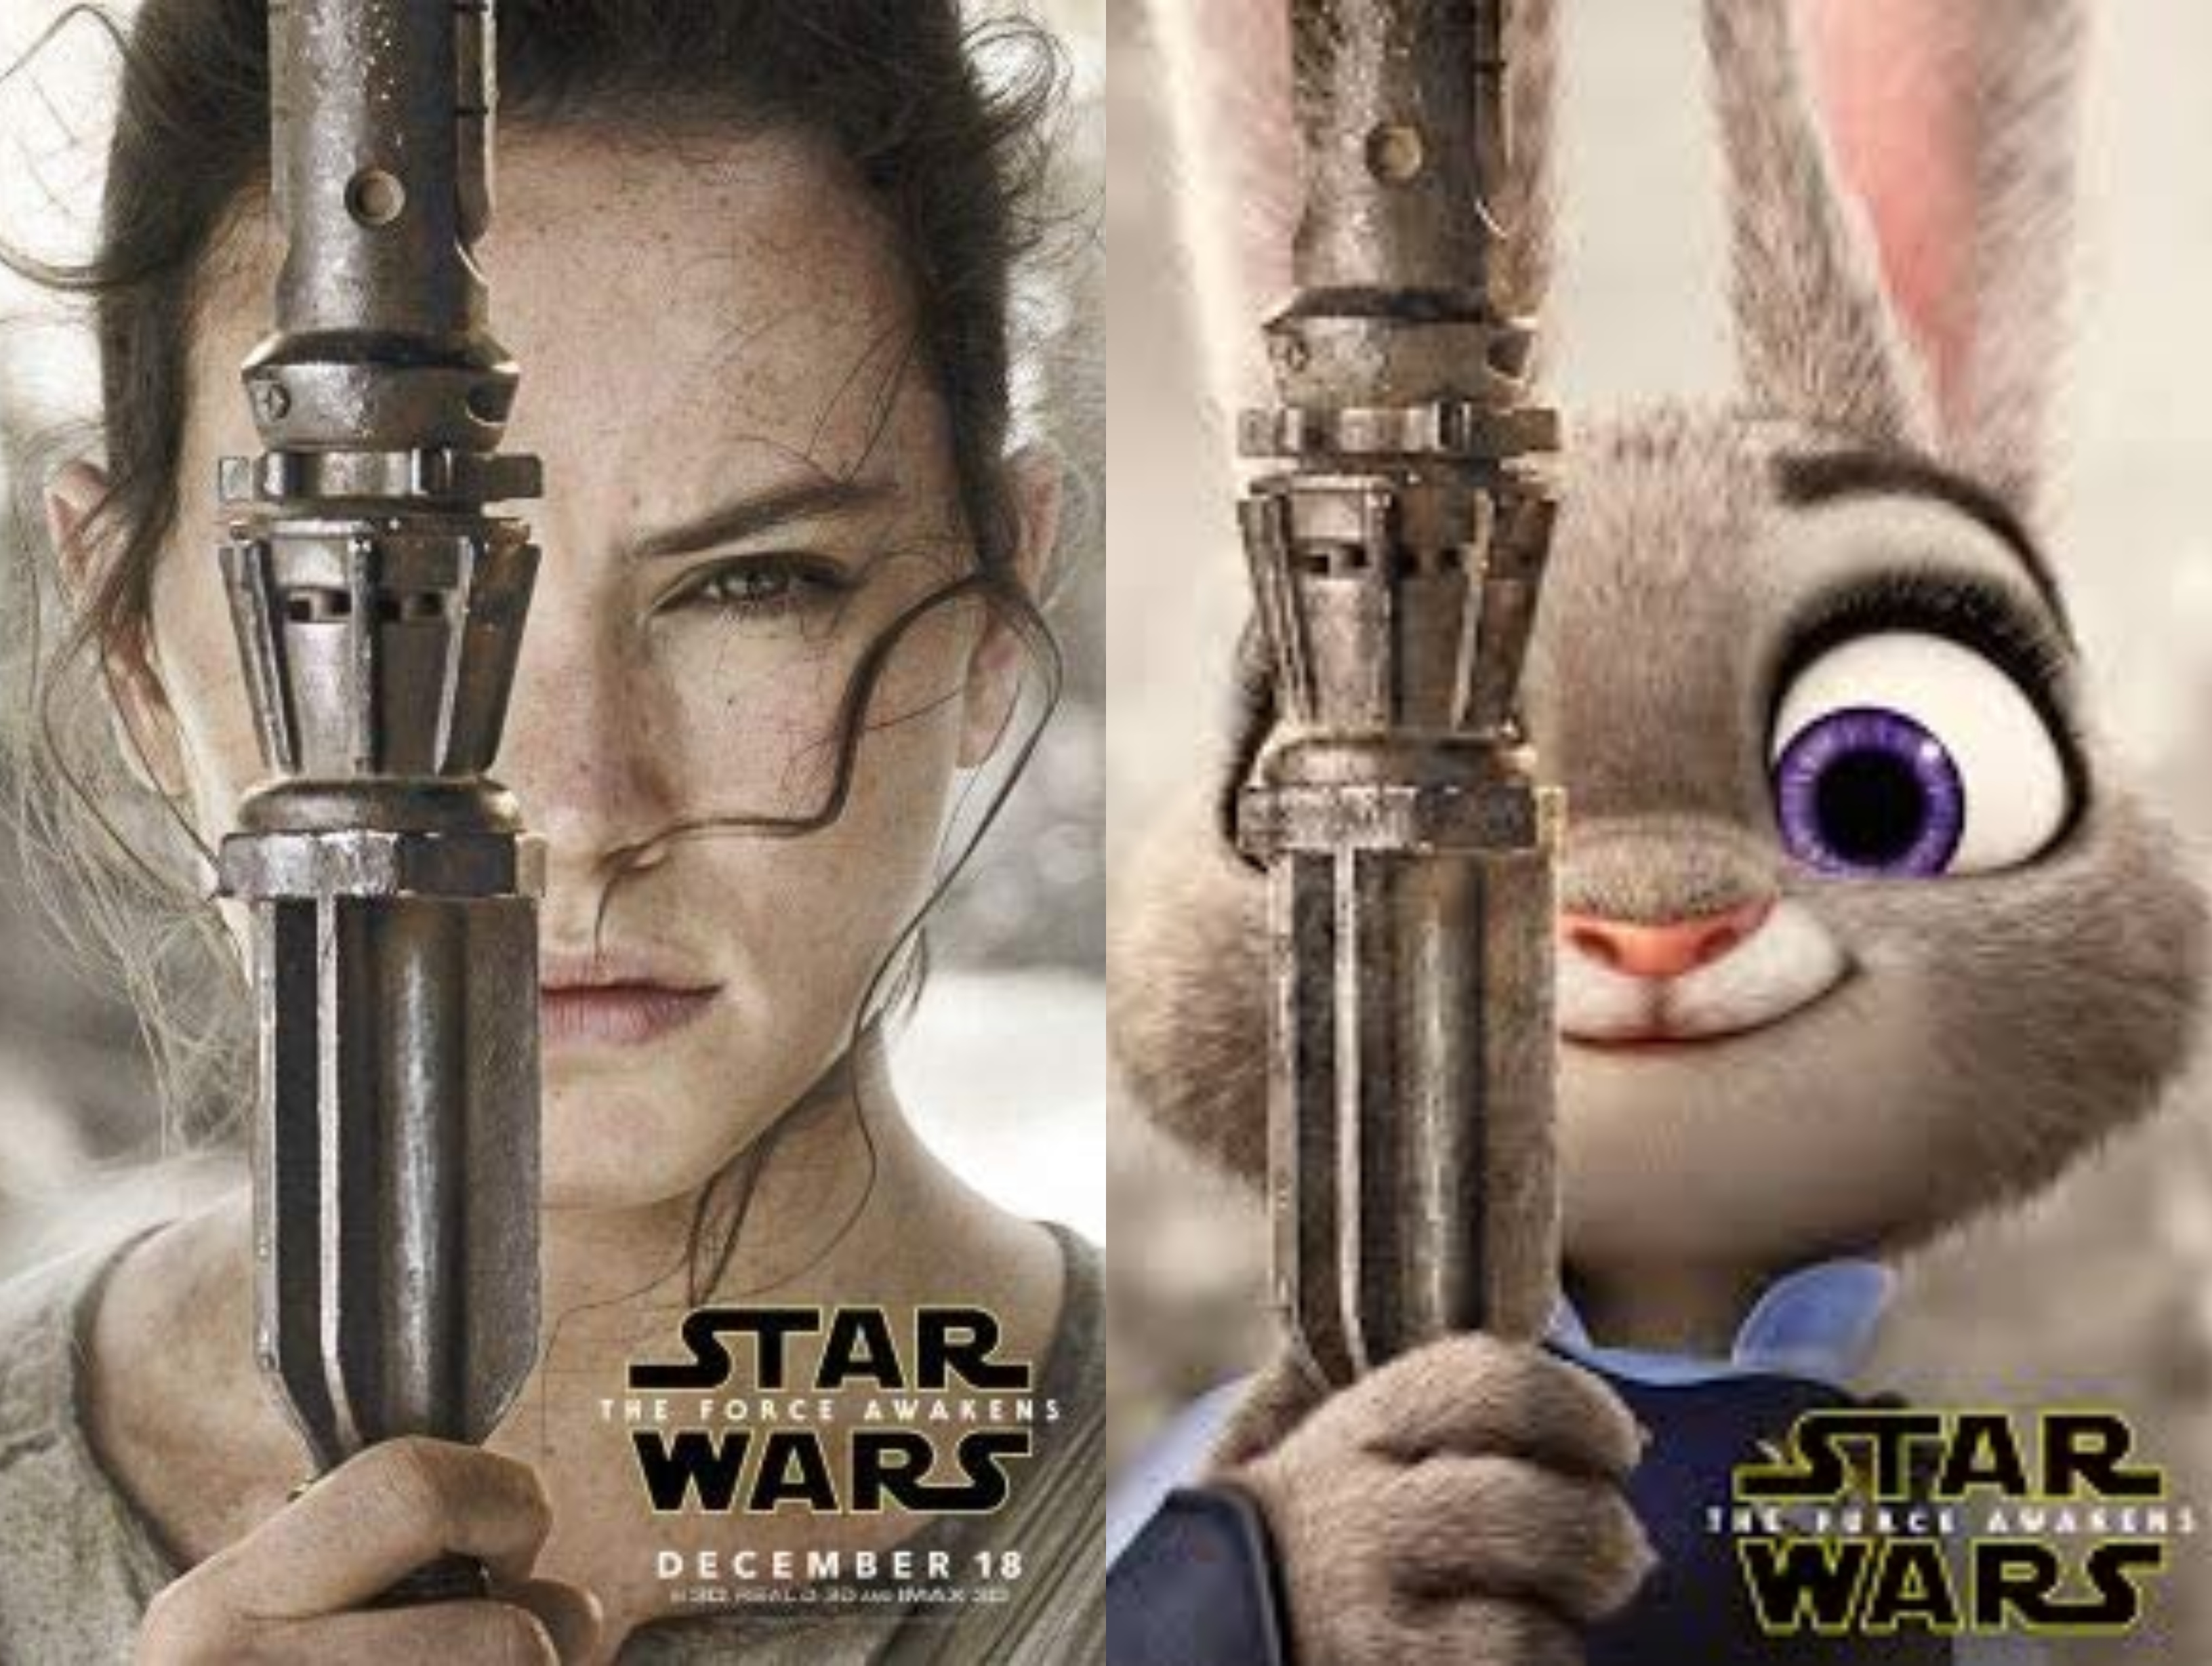 Posters for Star Wars: The Force Awakens and Star Wars: The Furce Awakens